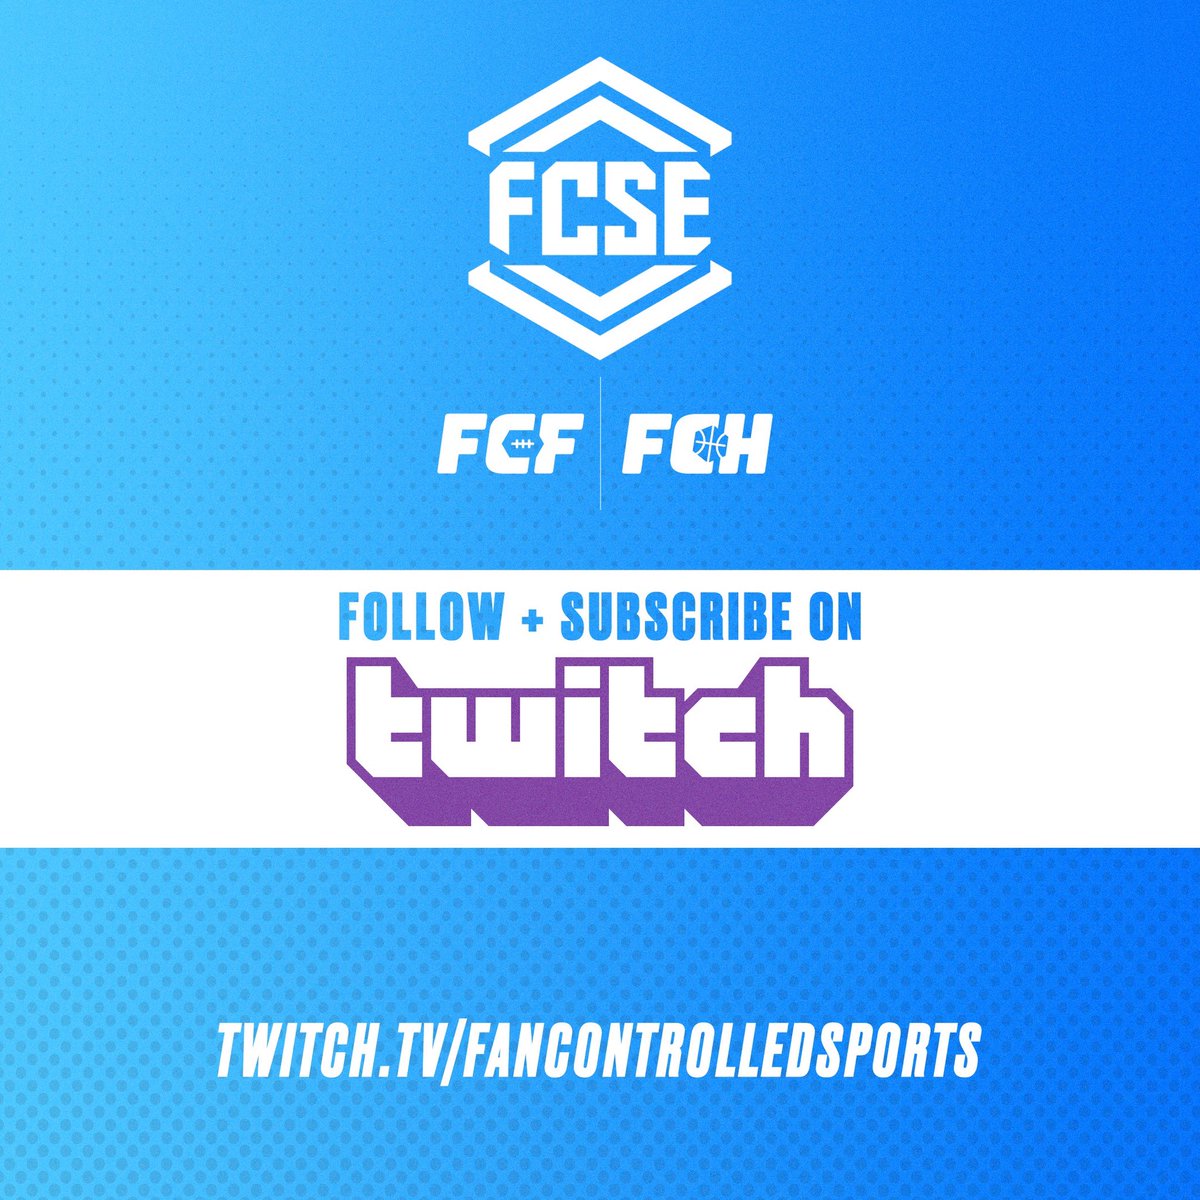 Fan Controlled Sports + Entertainment has a NEW home on Twitch❗ Don't miss the action - subscribe now! 🔗 twitch.tv/fancontrolleds…